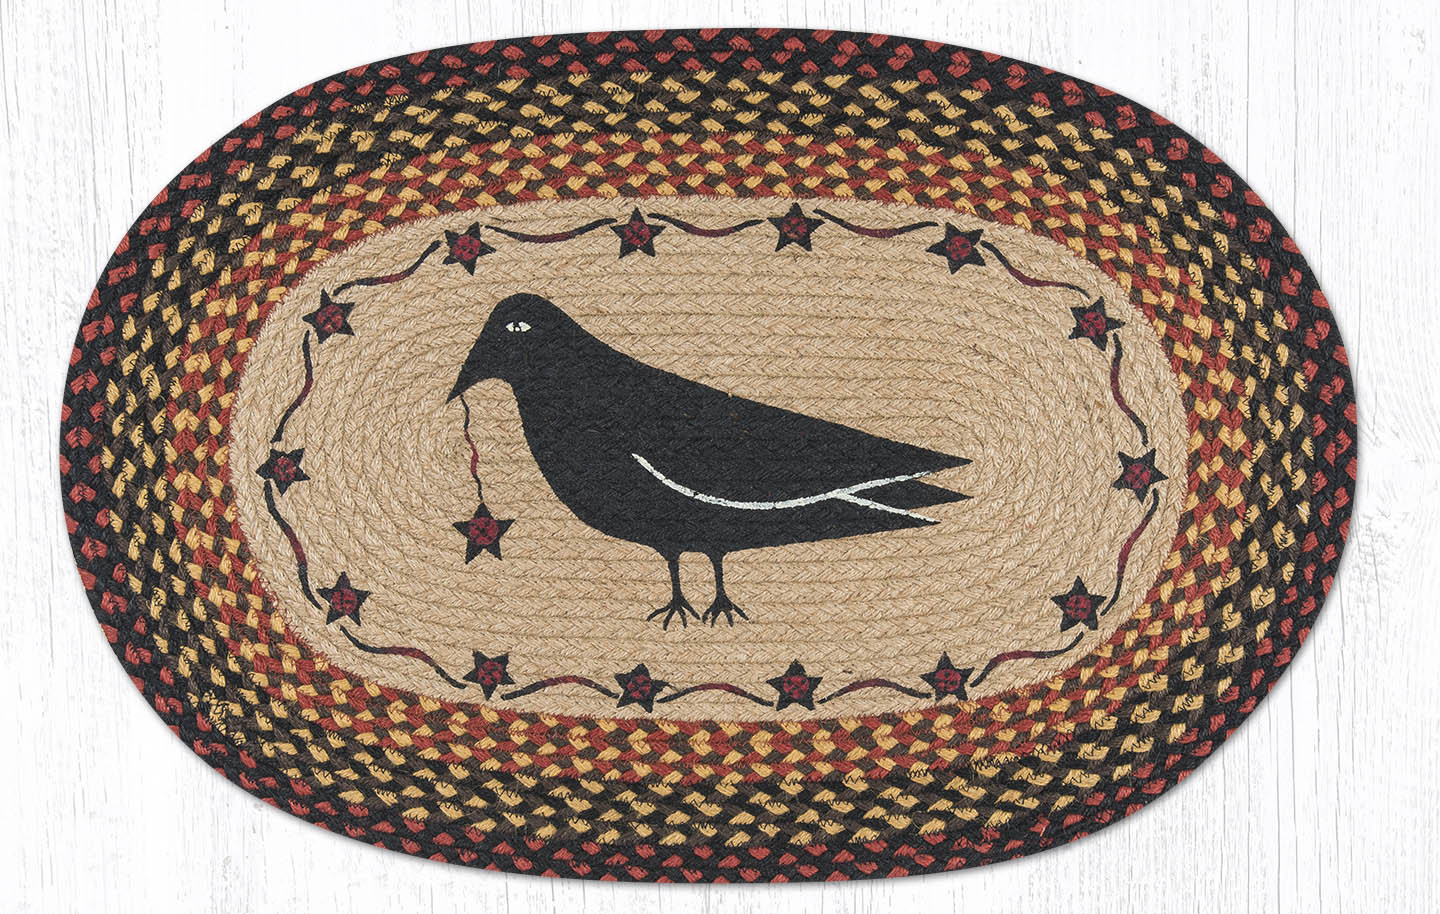 A traditional artisan braided rug depicting a crow in the centre.